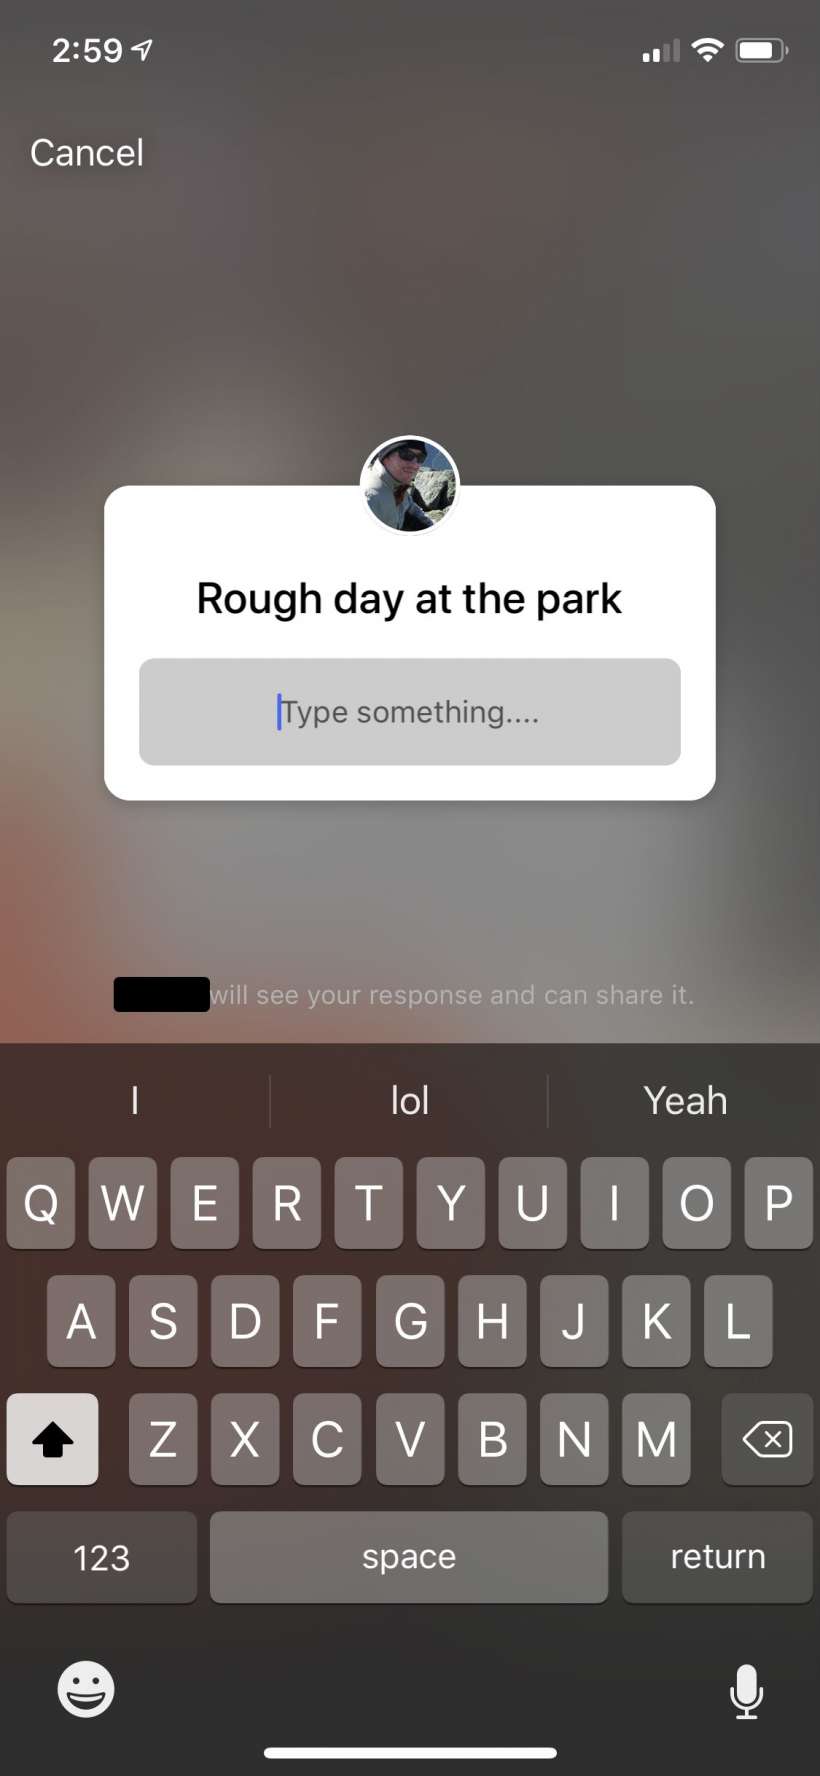 How to use question stickers in Instagram on iPhone and iPad.